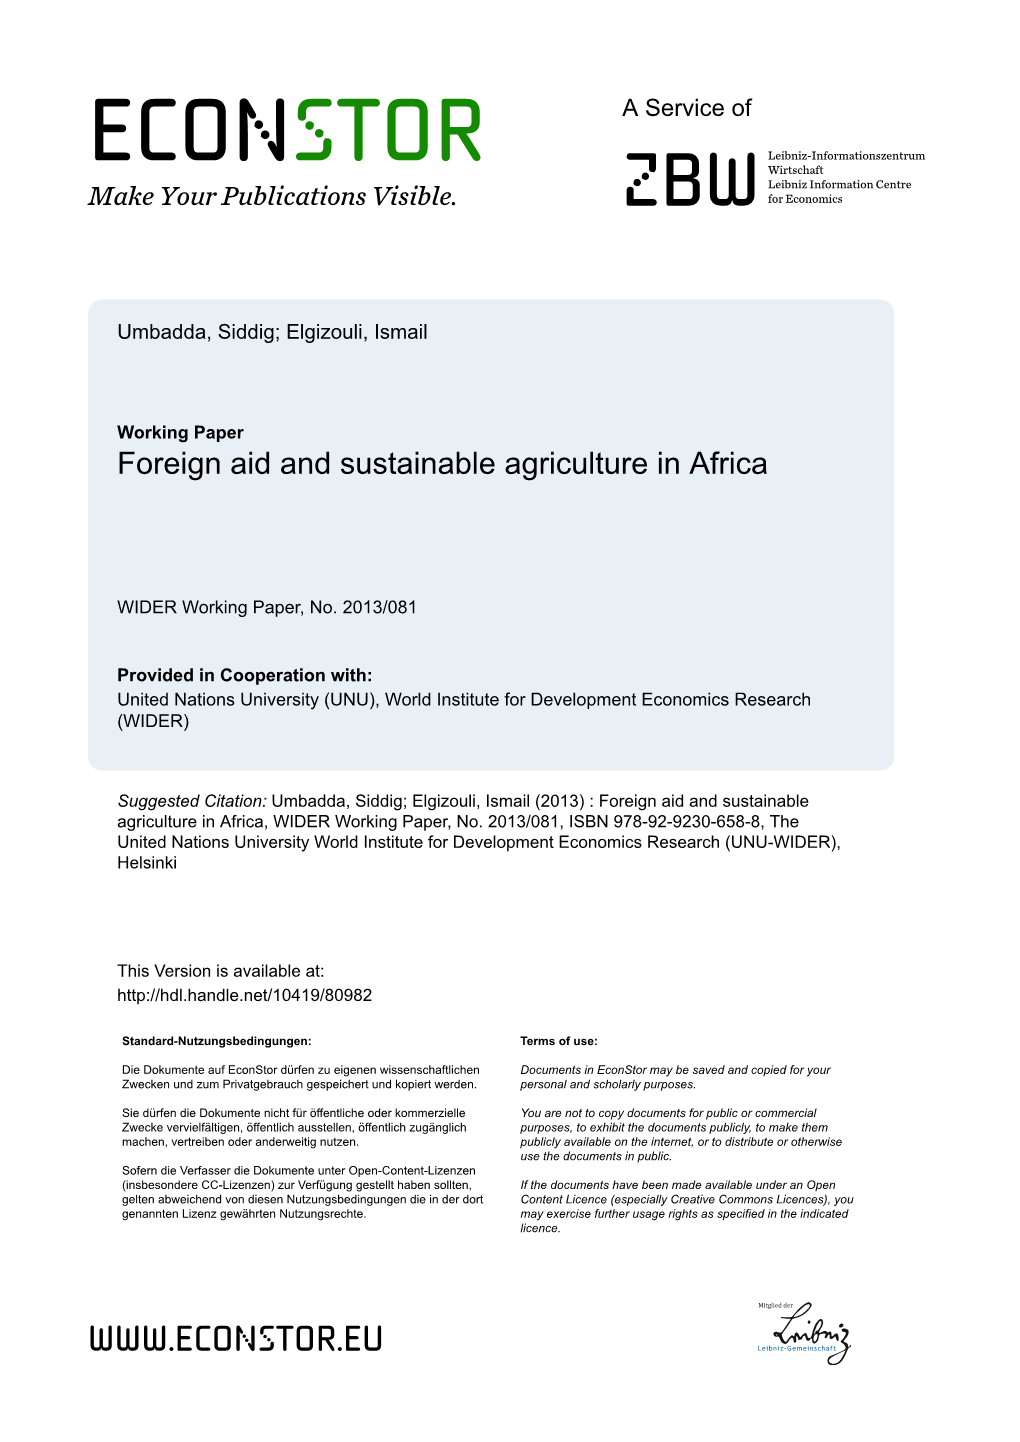 Foreign Aid and Sustainable Agriculture in Africa